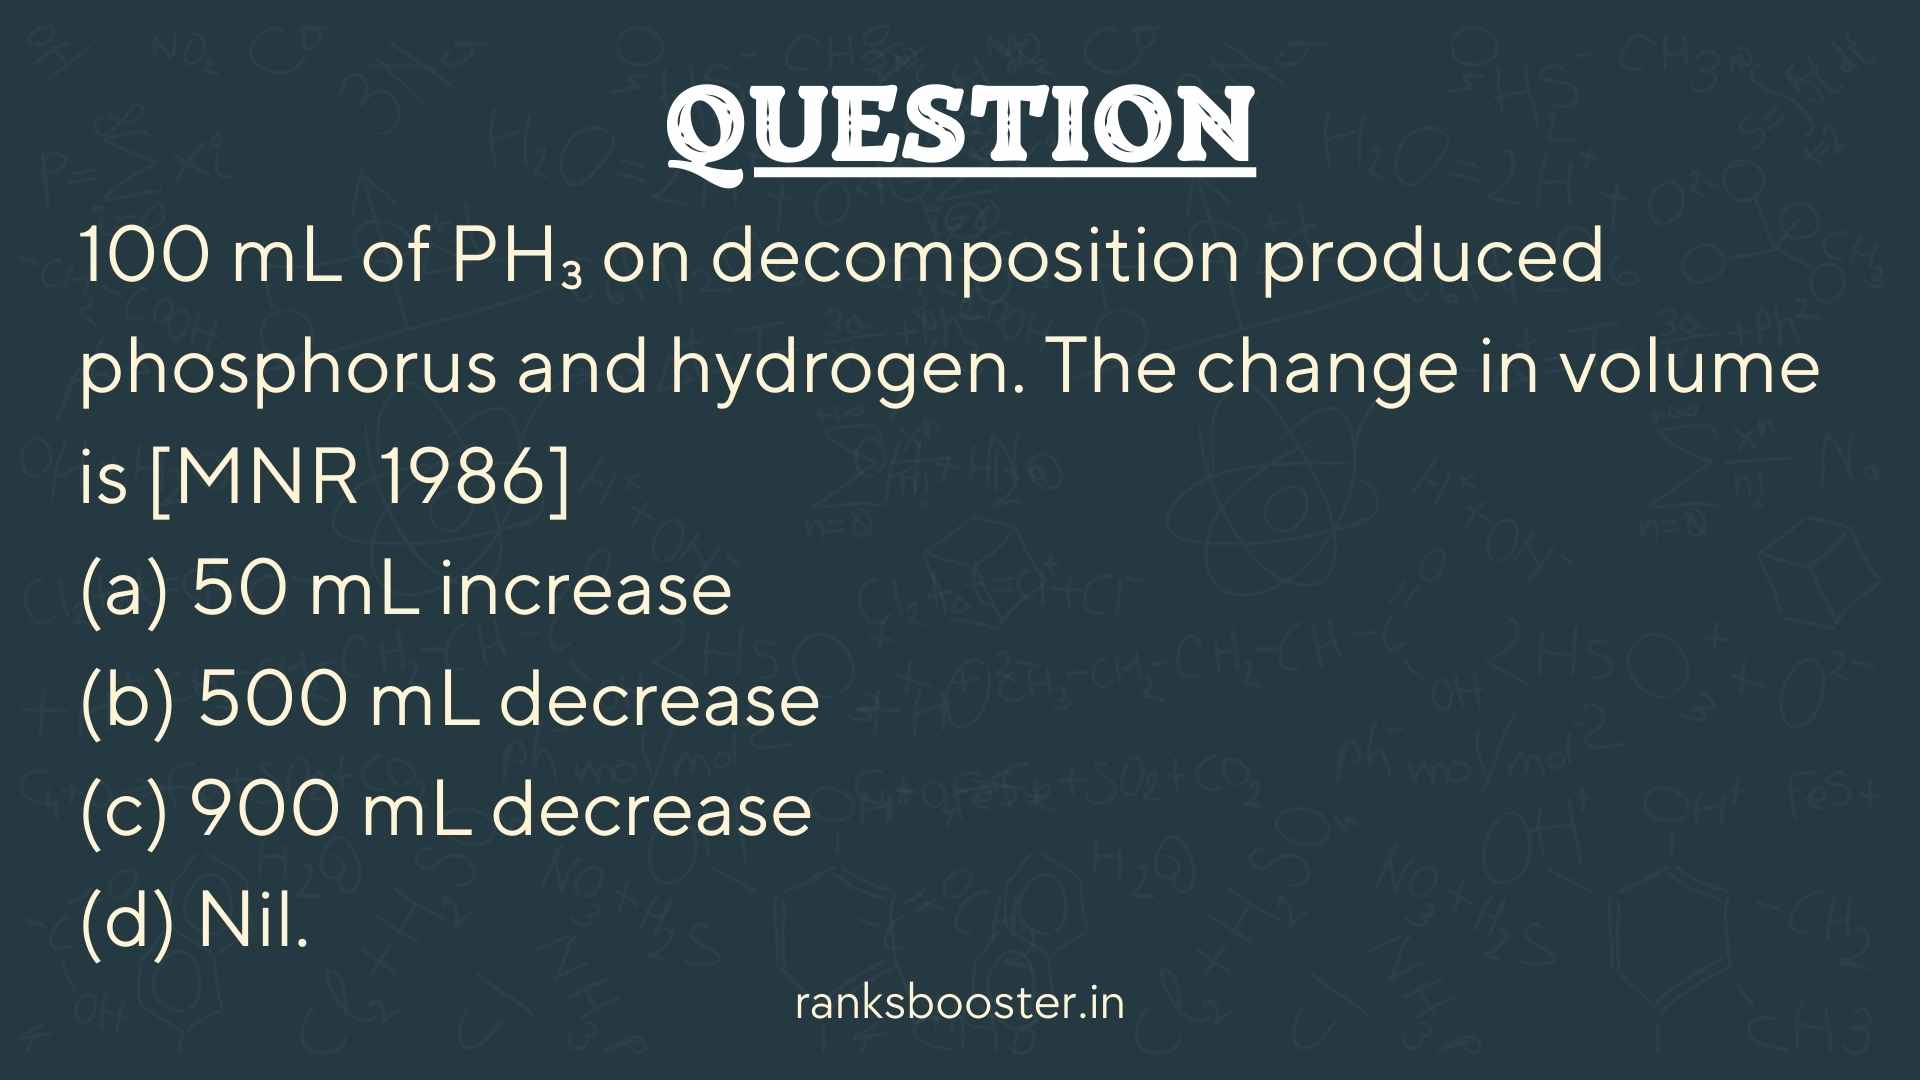 100 mL of PH₃ on decomposition produced phosphorus and hydrogen. The change in volume is [MNR 1986] (a) 50 mL increase (b) 500 mL decrease (c) 900 mL decrease (d) Nil.